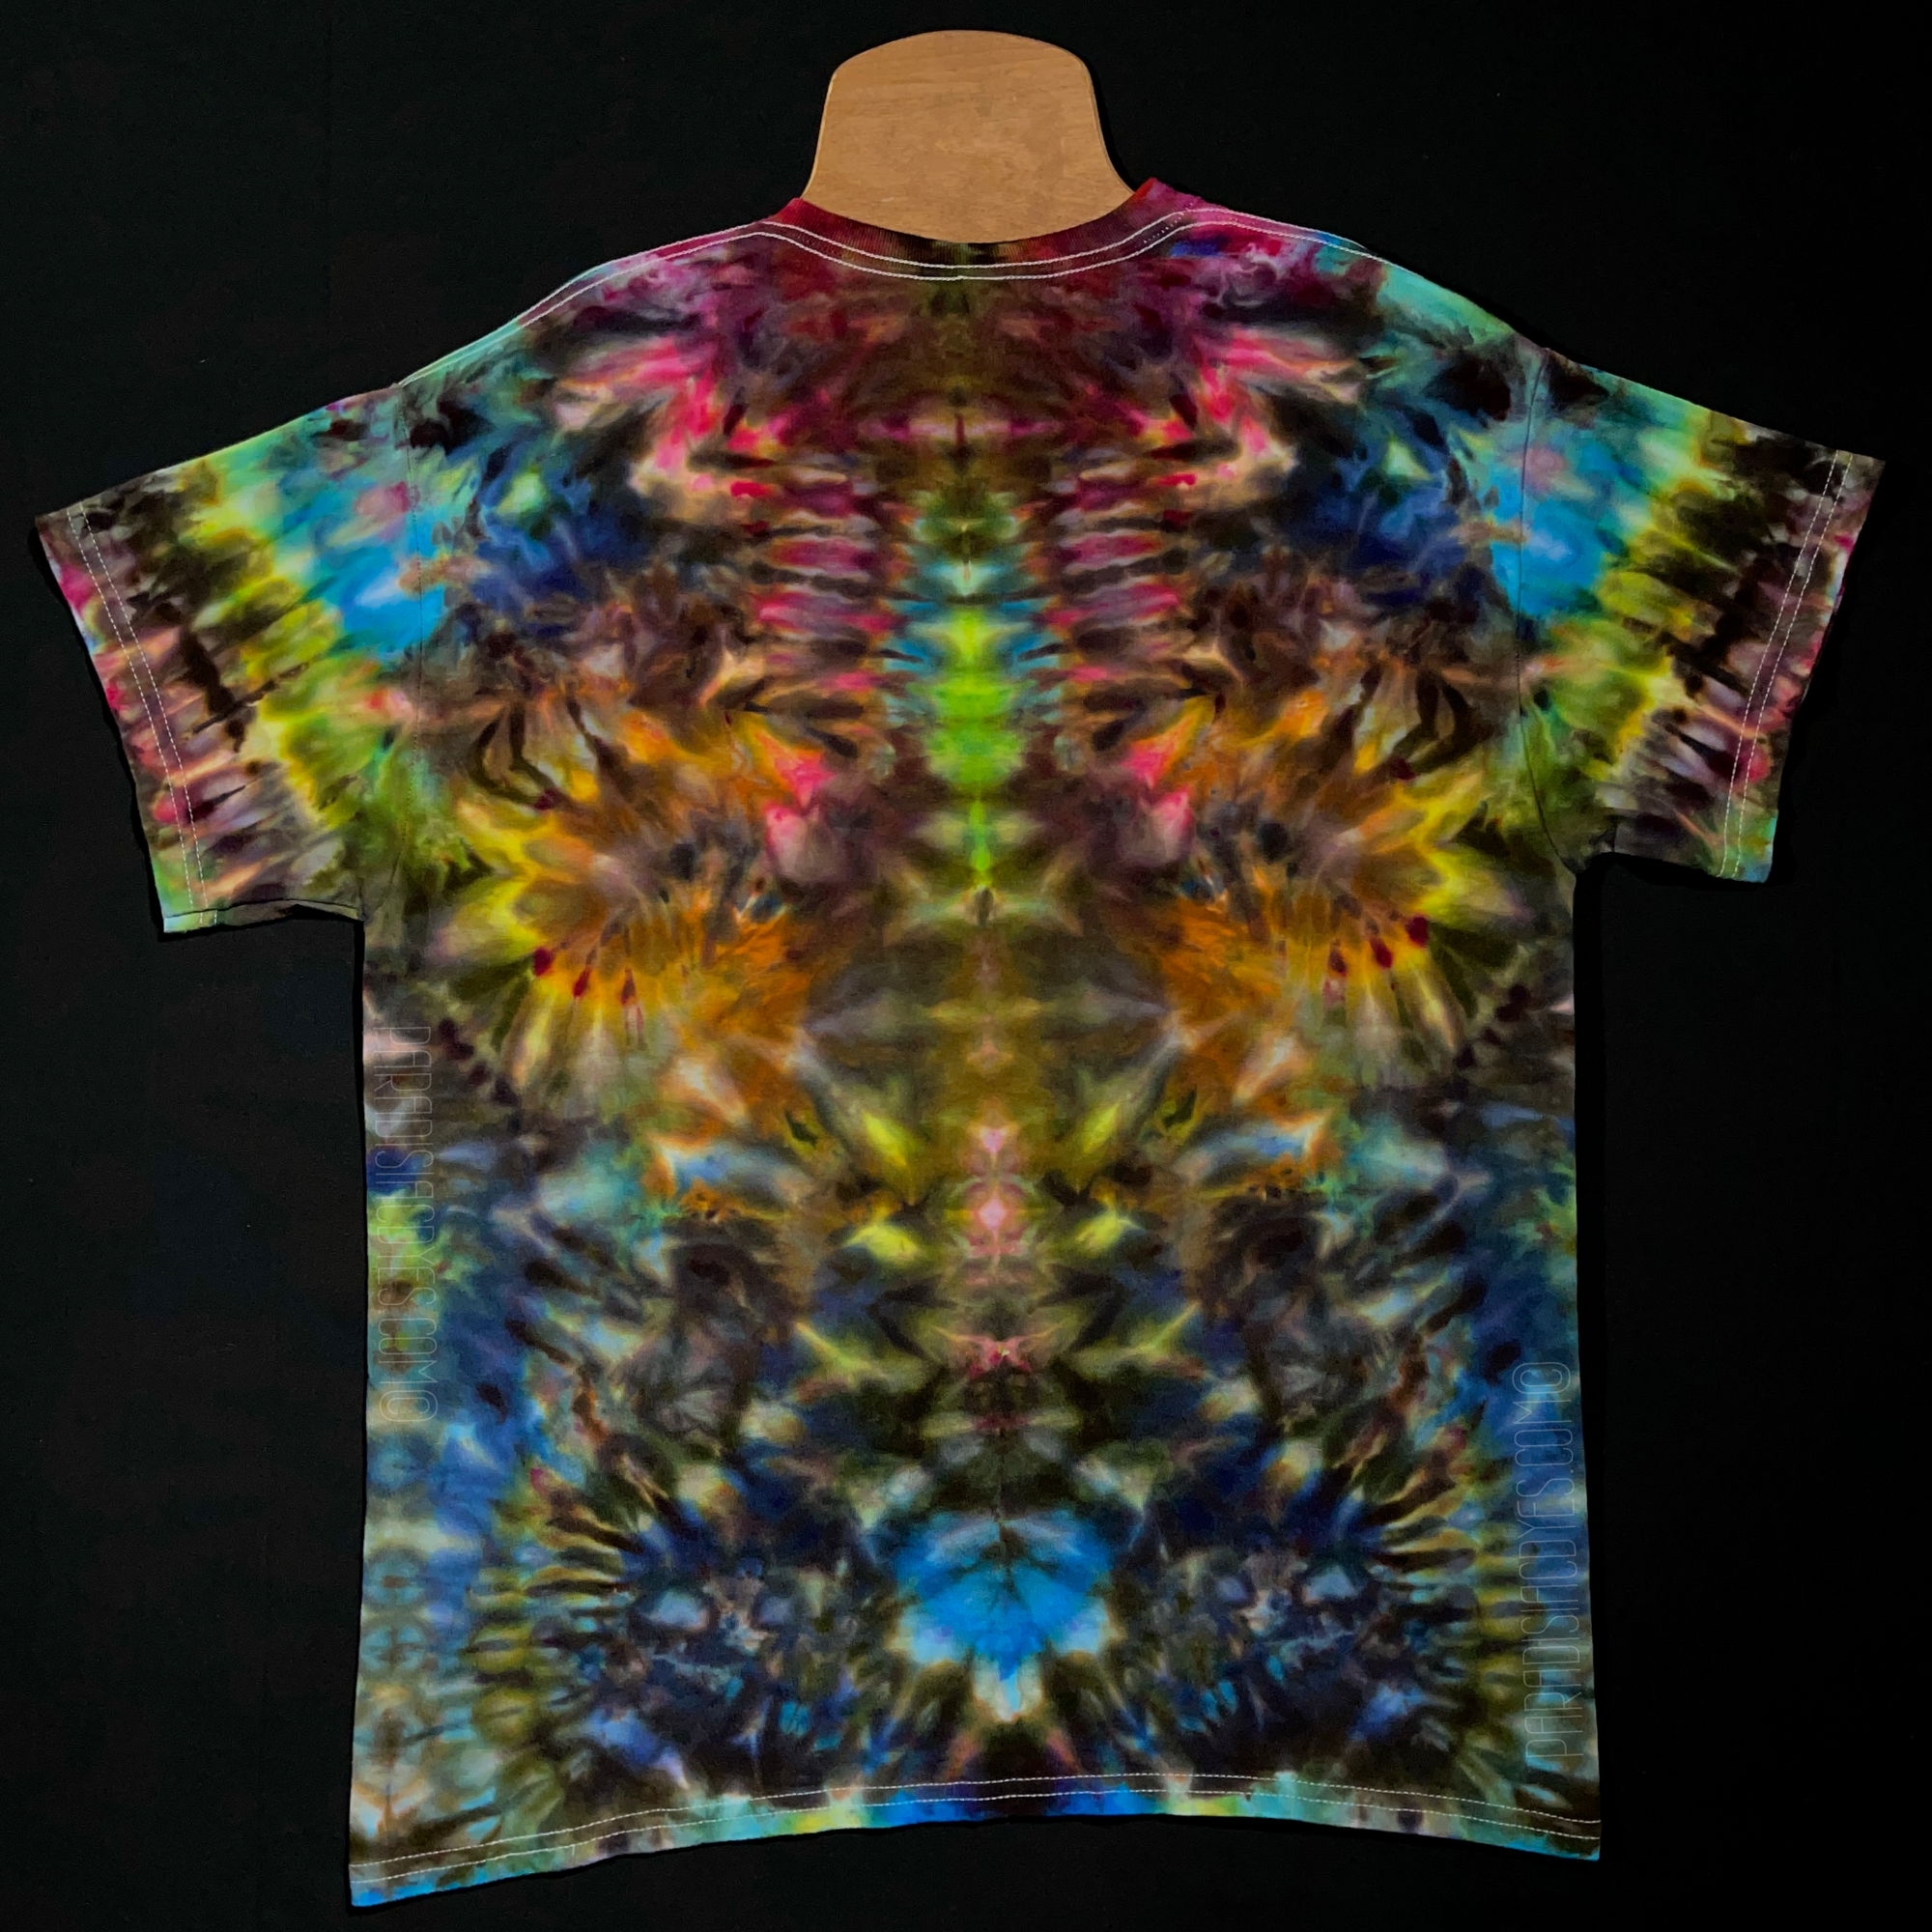 Back side of the same neon rainbow psychedelic mindscape ice dye design; laid flat on a solid black background